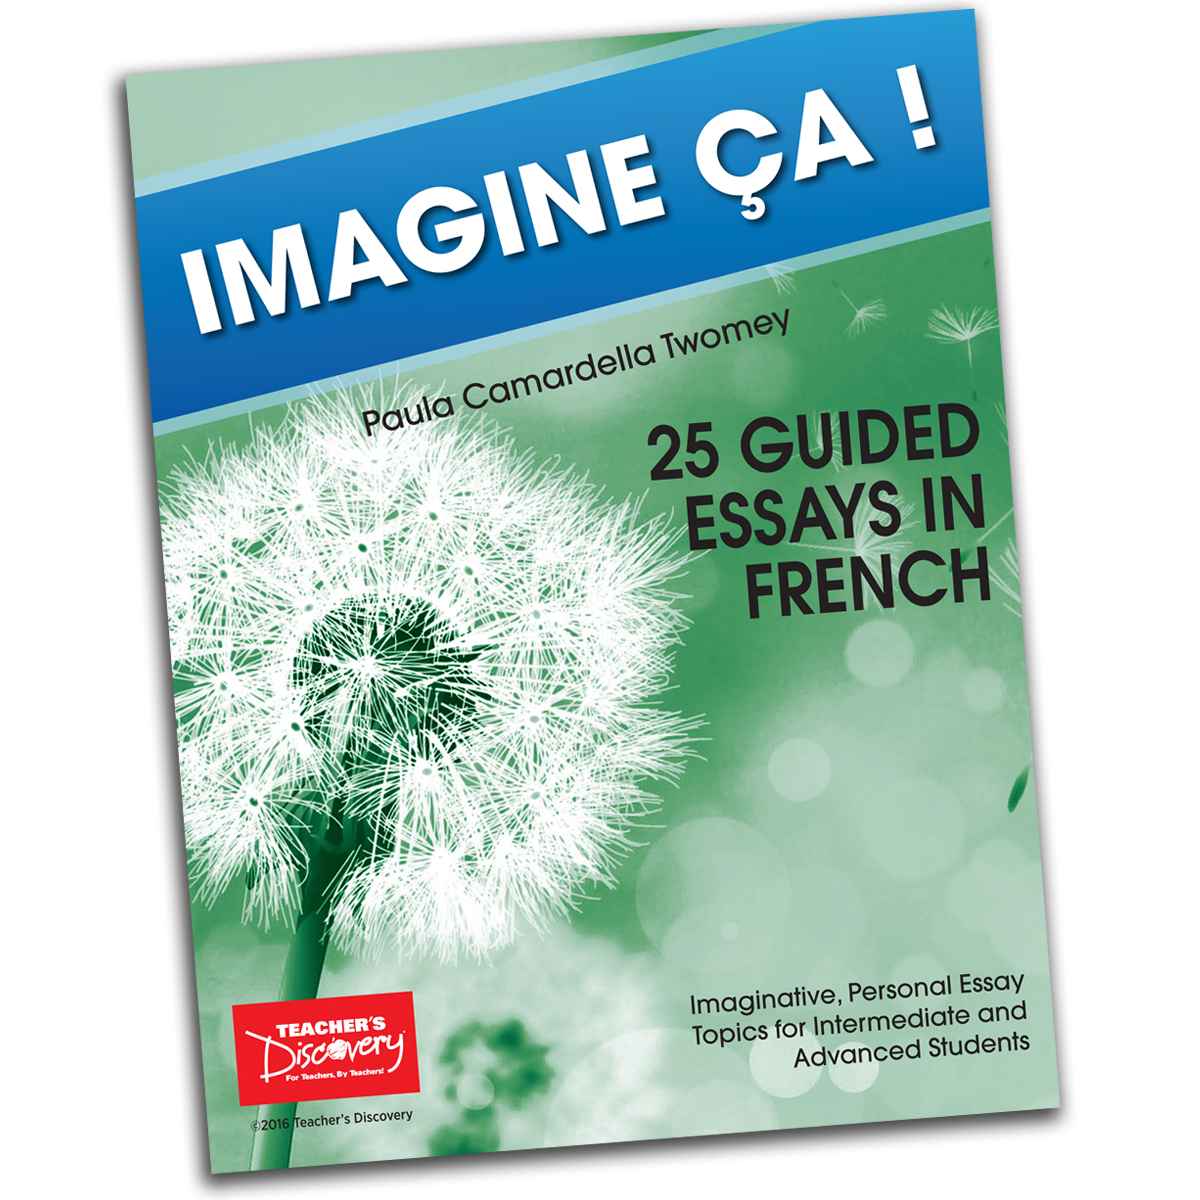 Imagine ça ! 25 Guided Essays in French Book